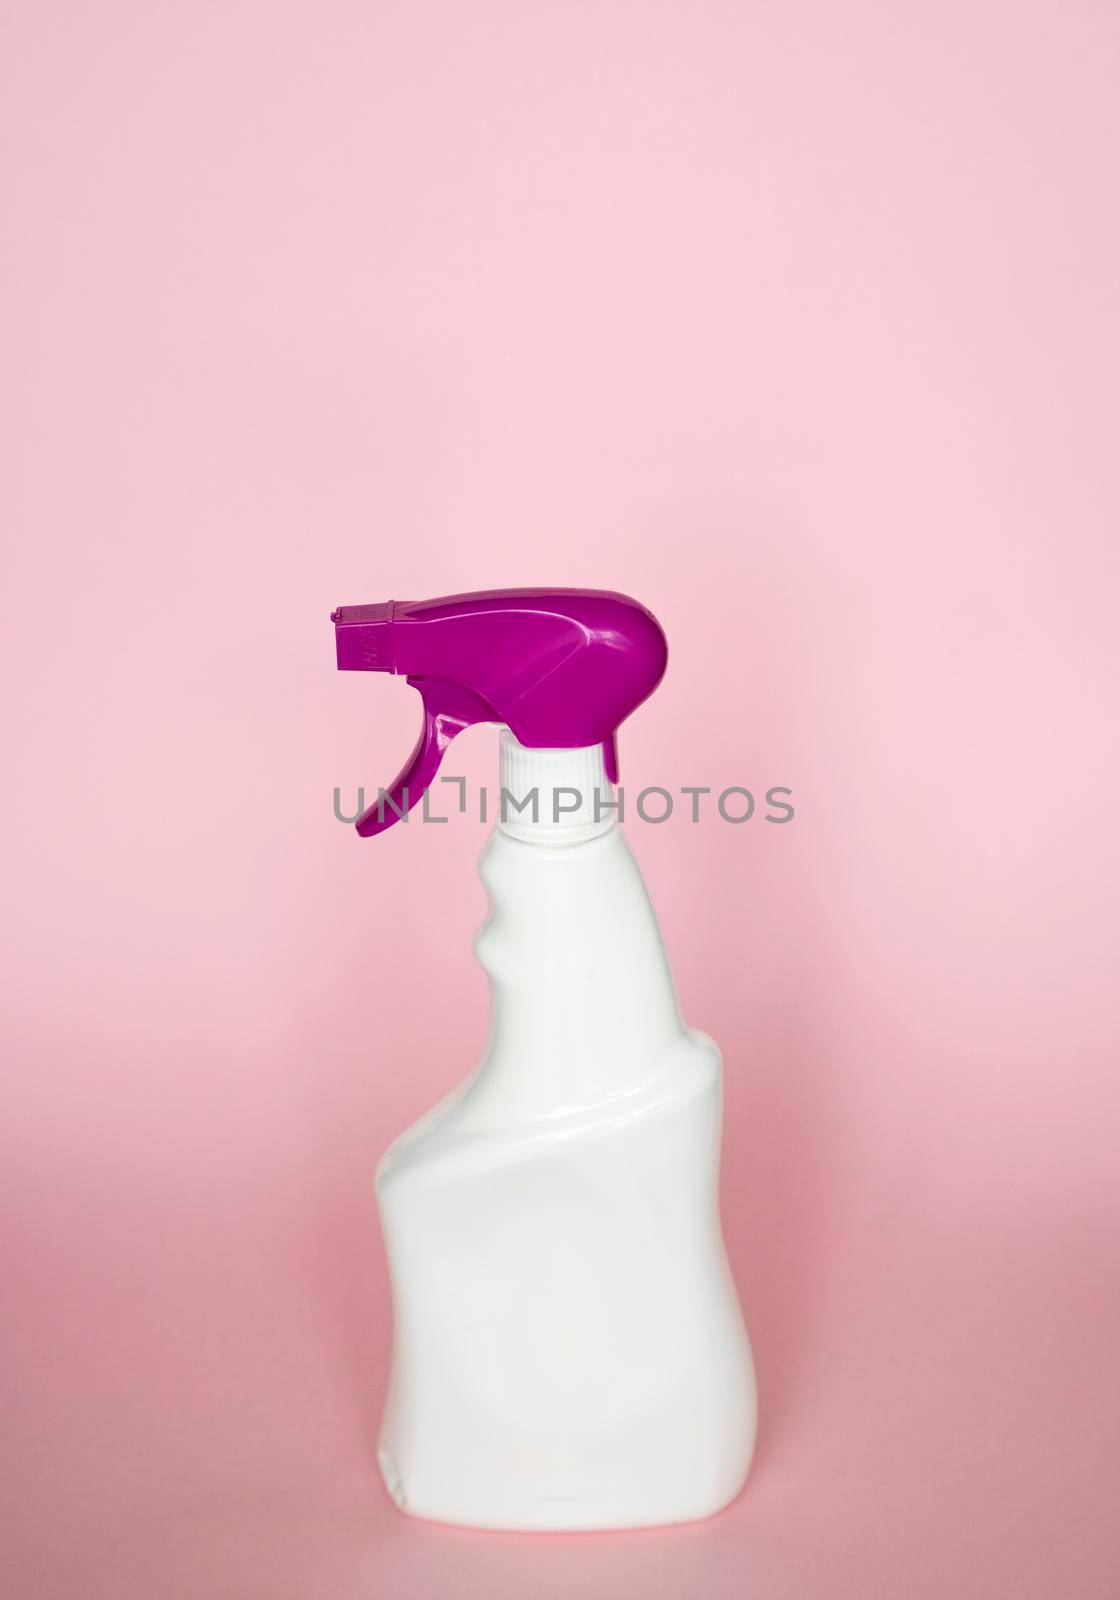 White plastic spray bottle for liquid cleaning products isolated on pink background. Packaging mockup bottle with violet sprayer